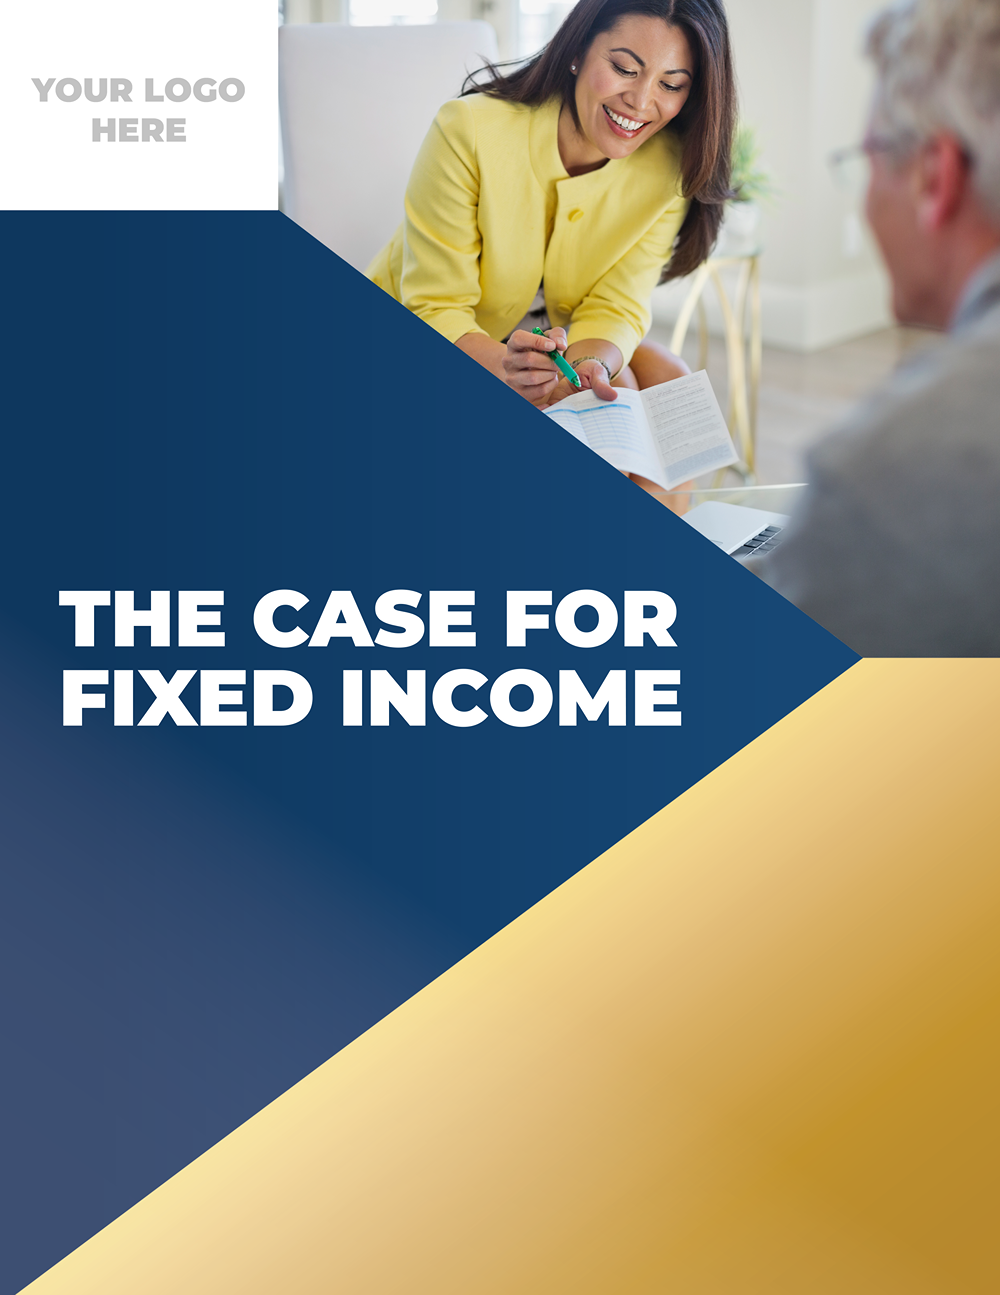 The Case for Fixed Income